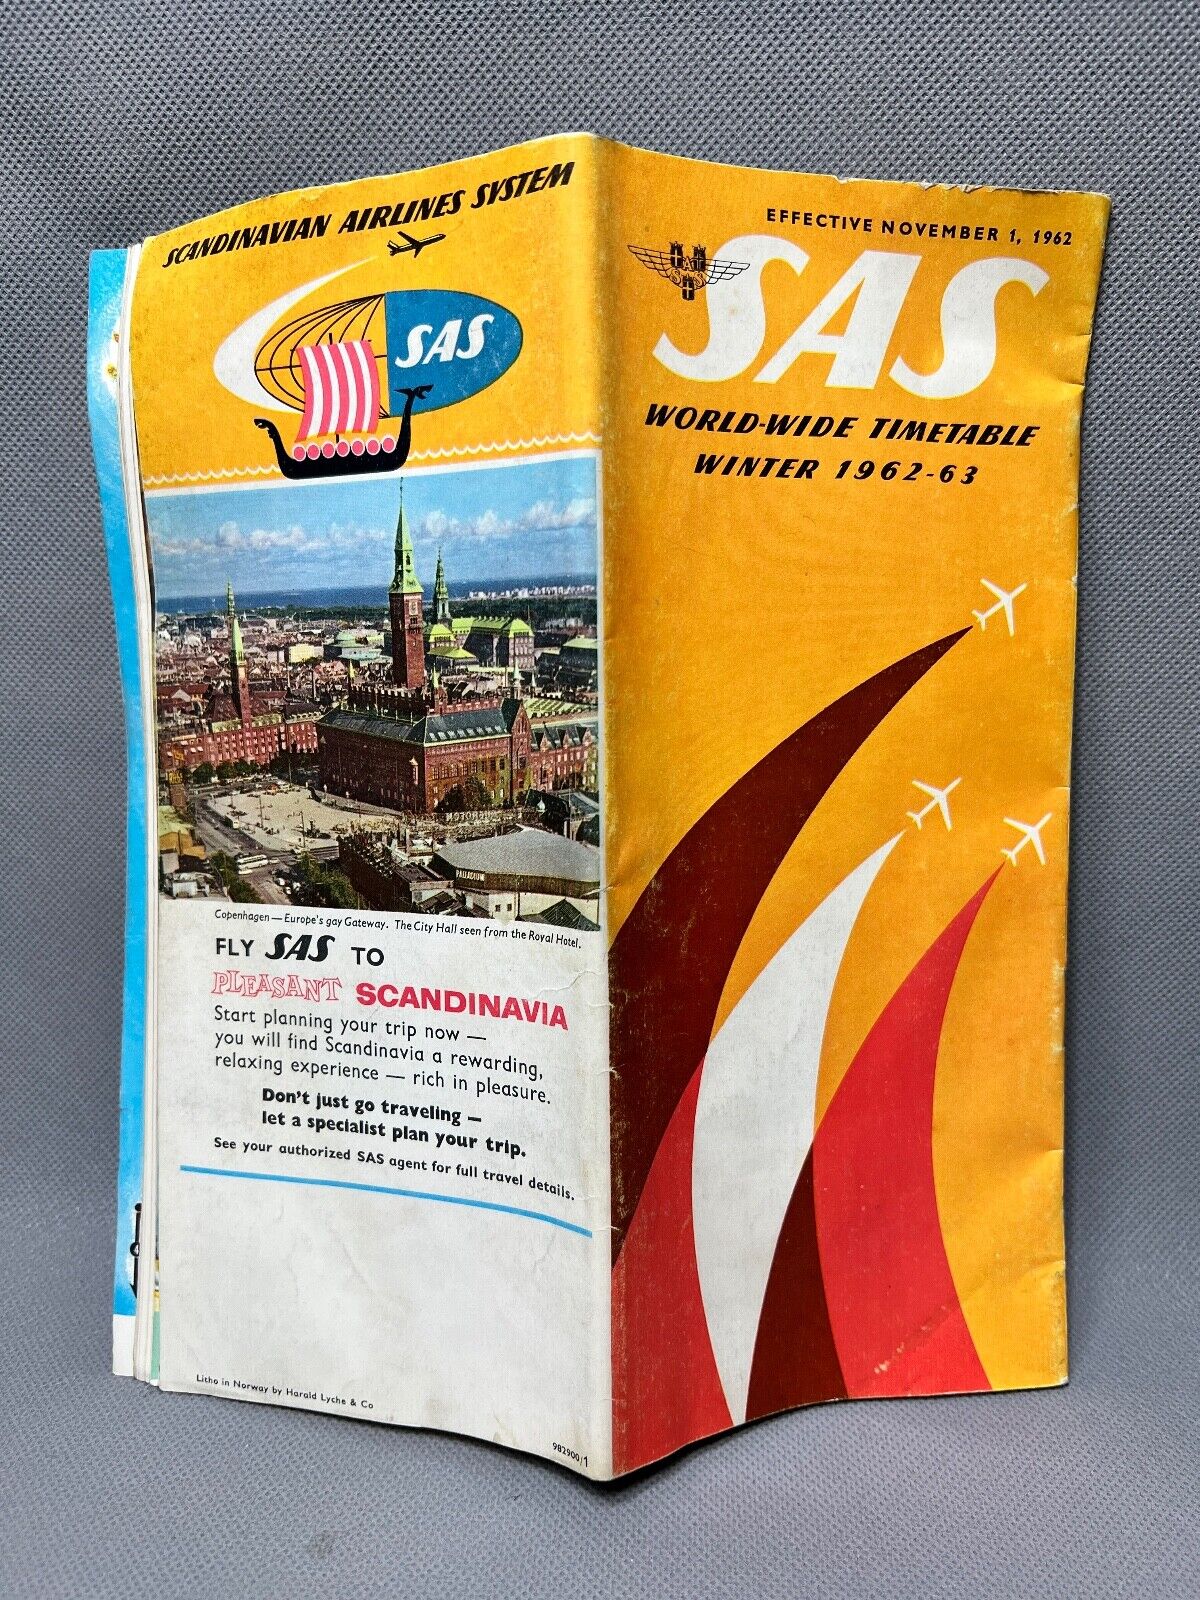 1962-63 Winter SAS Scandinavian Airlines Timetable World-wide Route Map